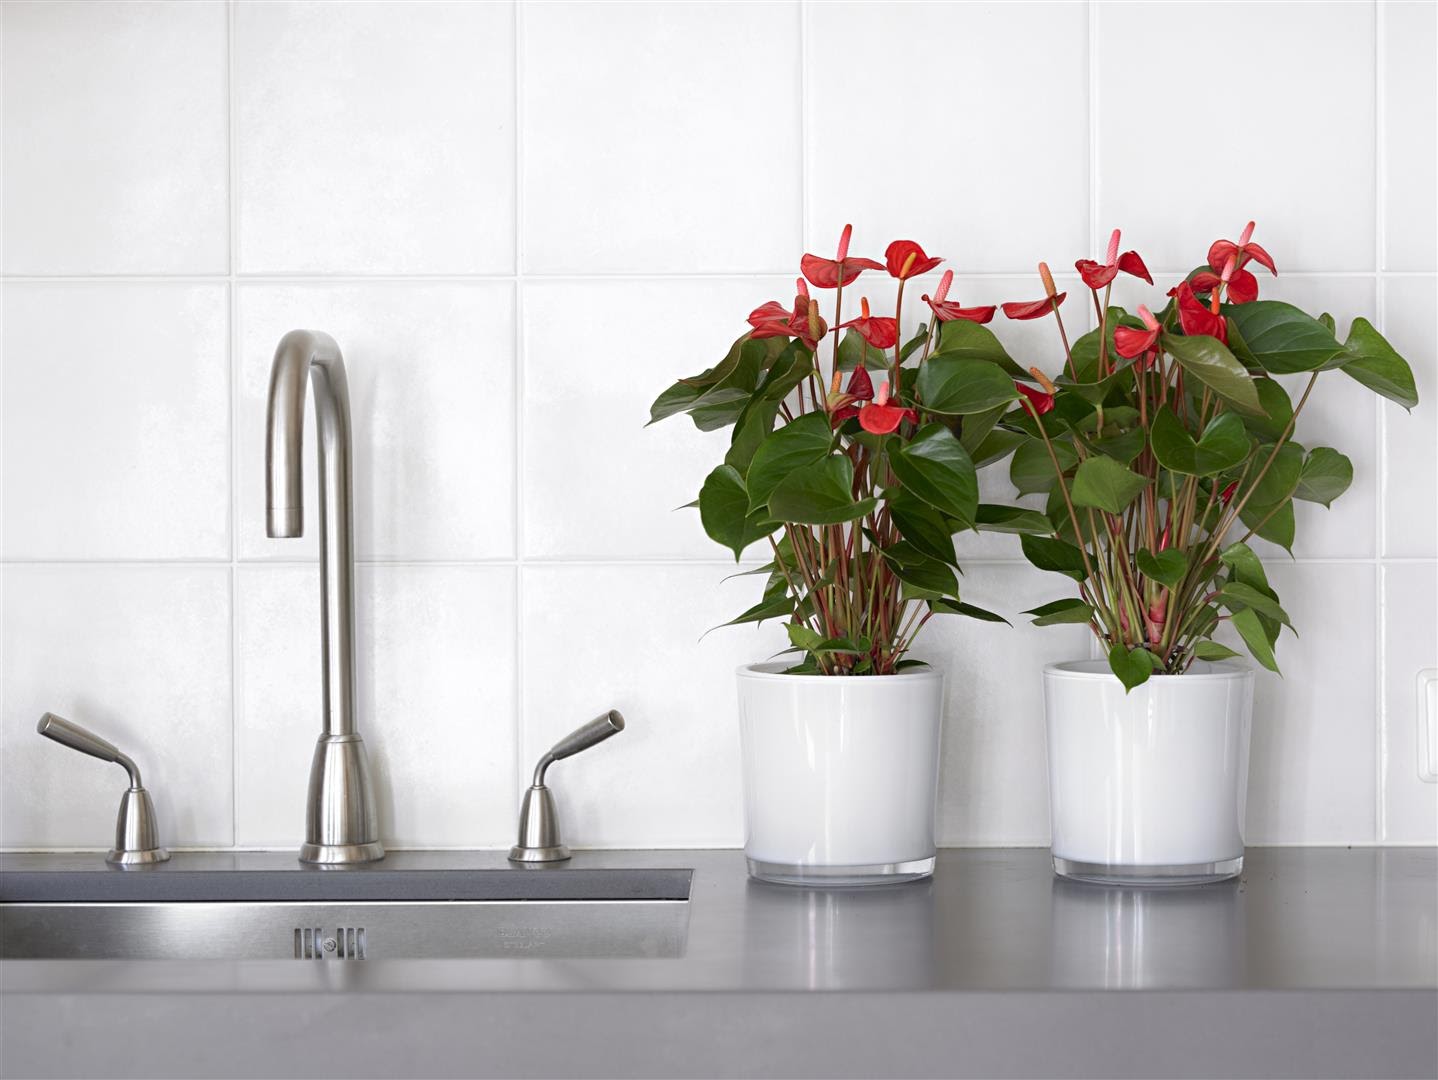 How to take care of anthurium so that it grows well?